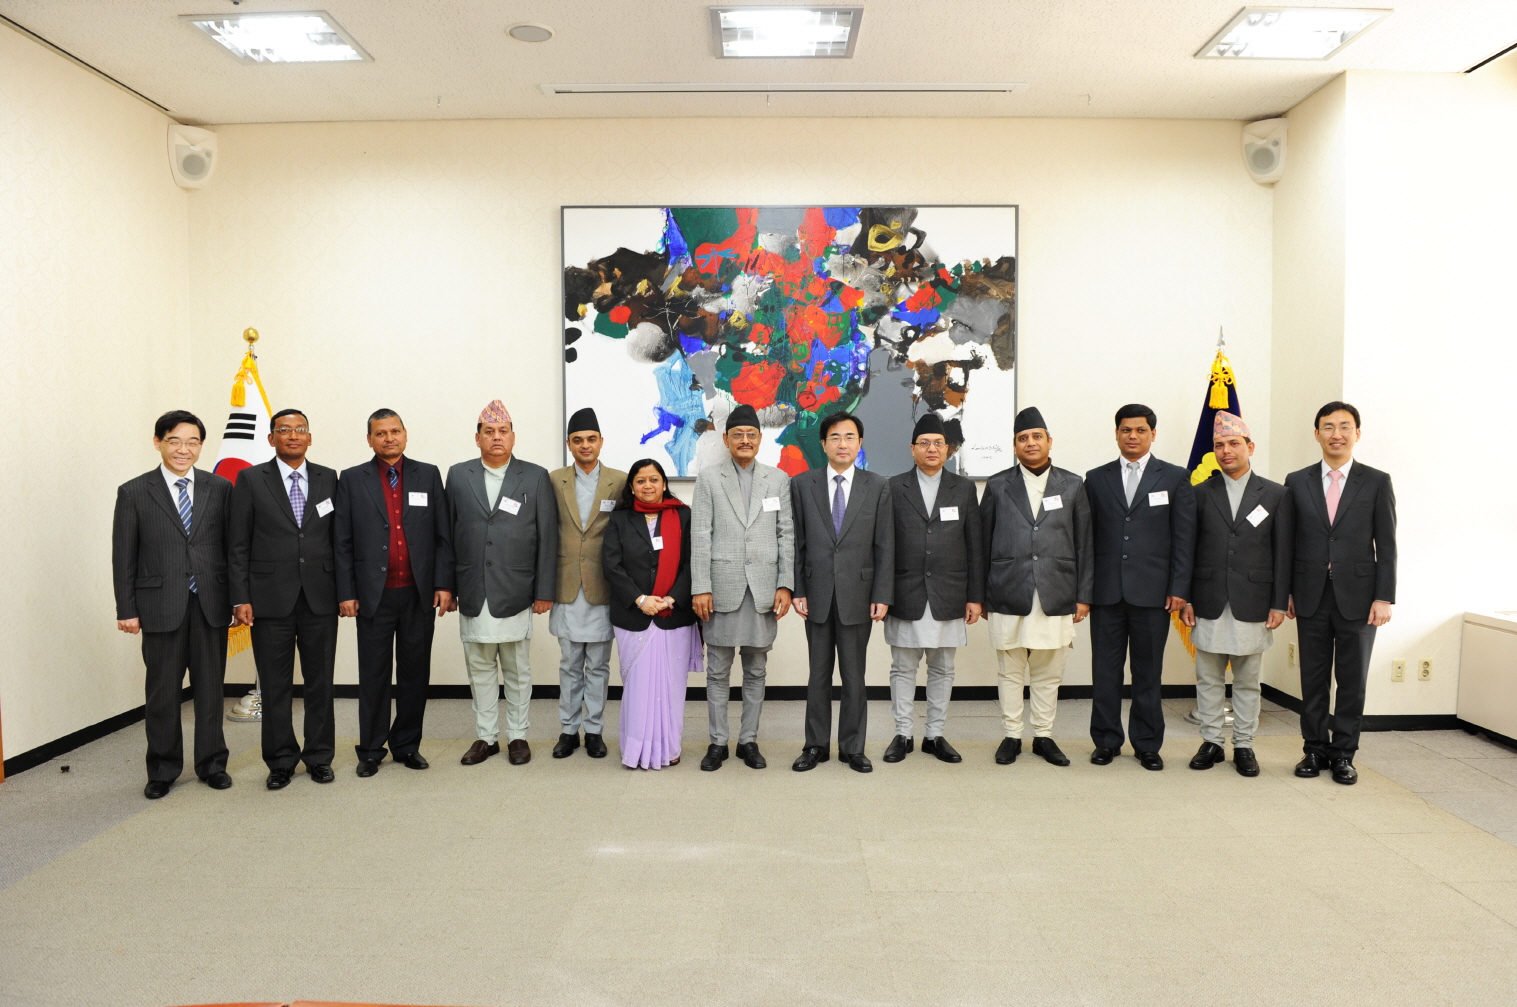 [03_26_12]The Supreme Court hosted a Judicial Training Program for Nepalese Judiciary